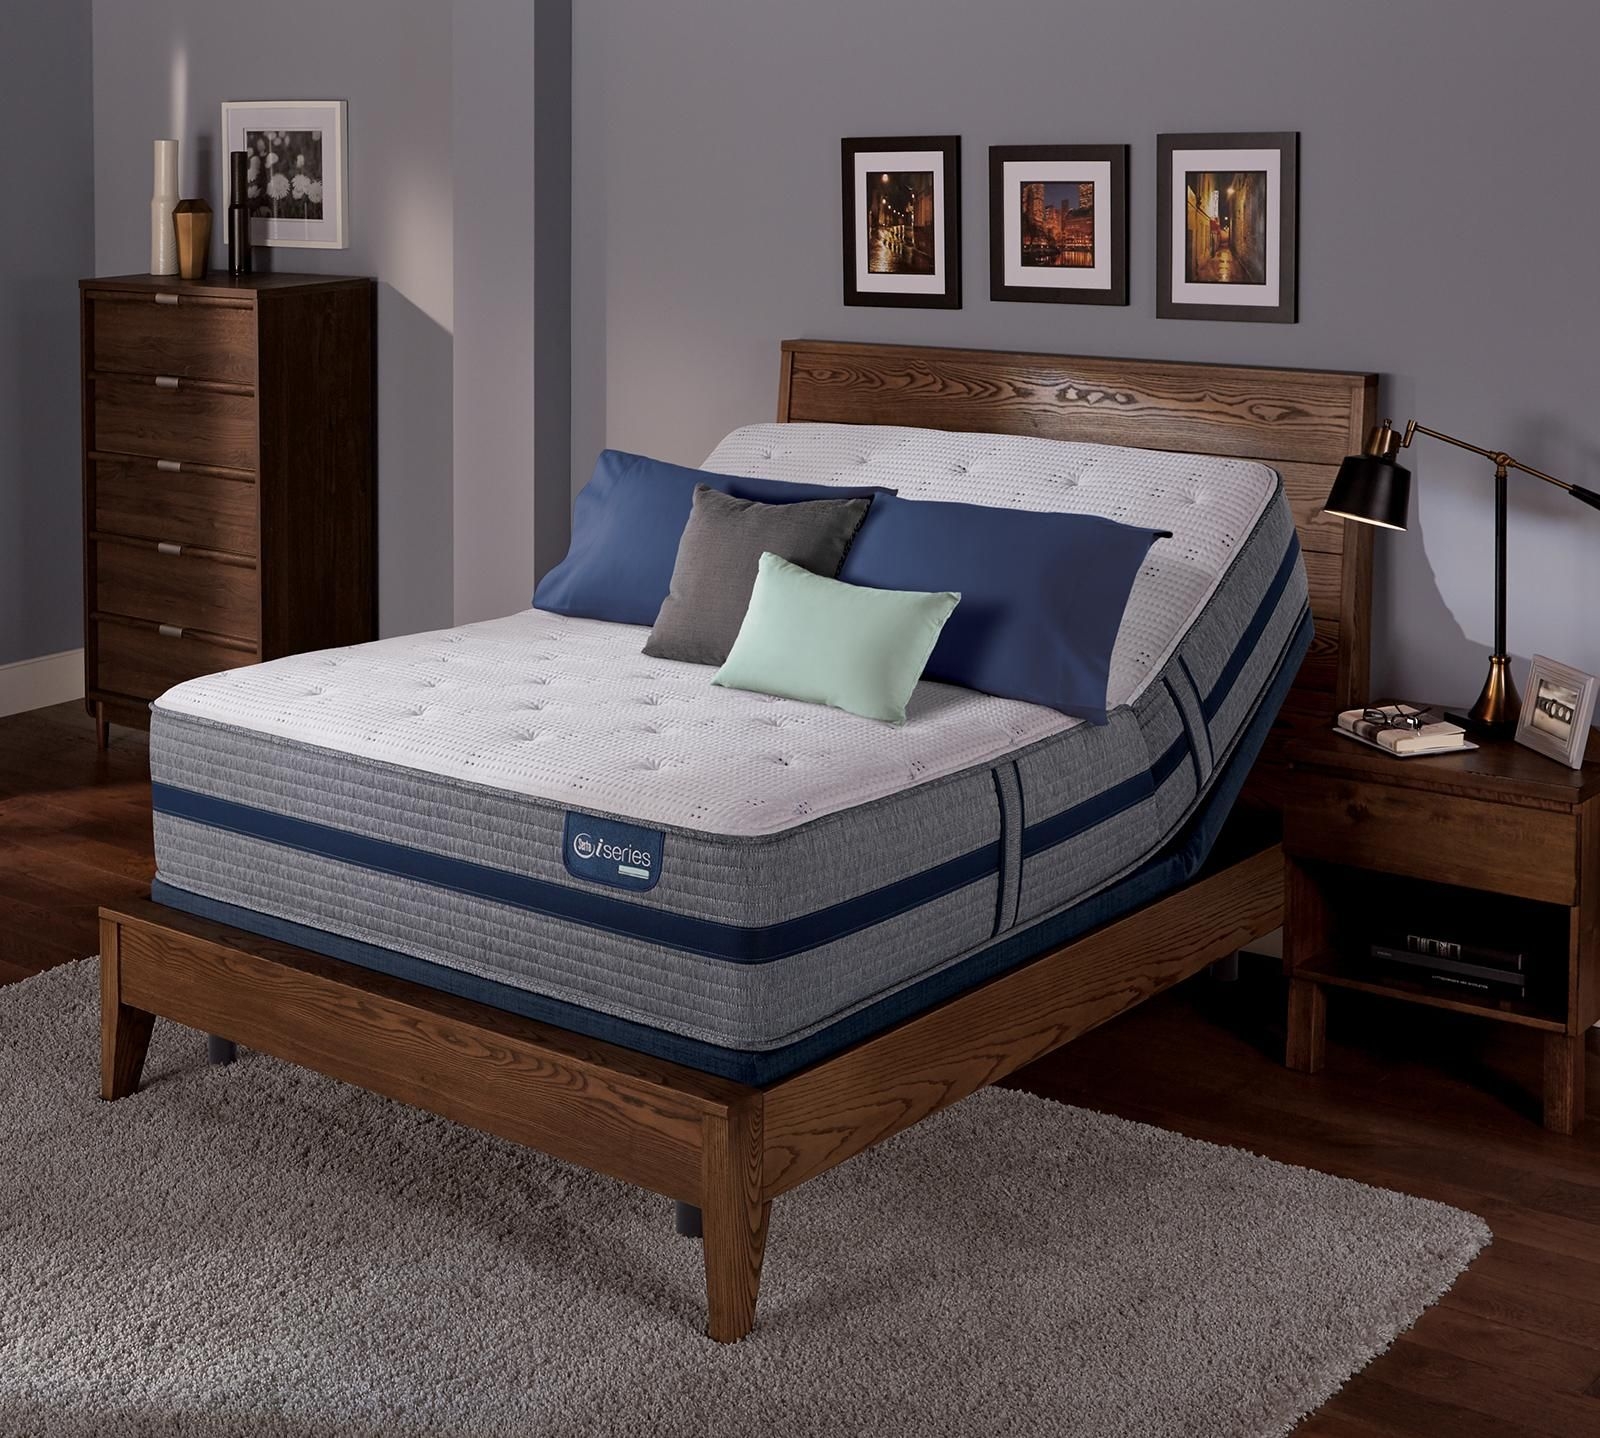 Headboards For Adjustable Beds Visualhunt, Can You Use A Headboard With An Adjustable Bed Frame